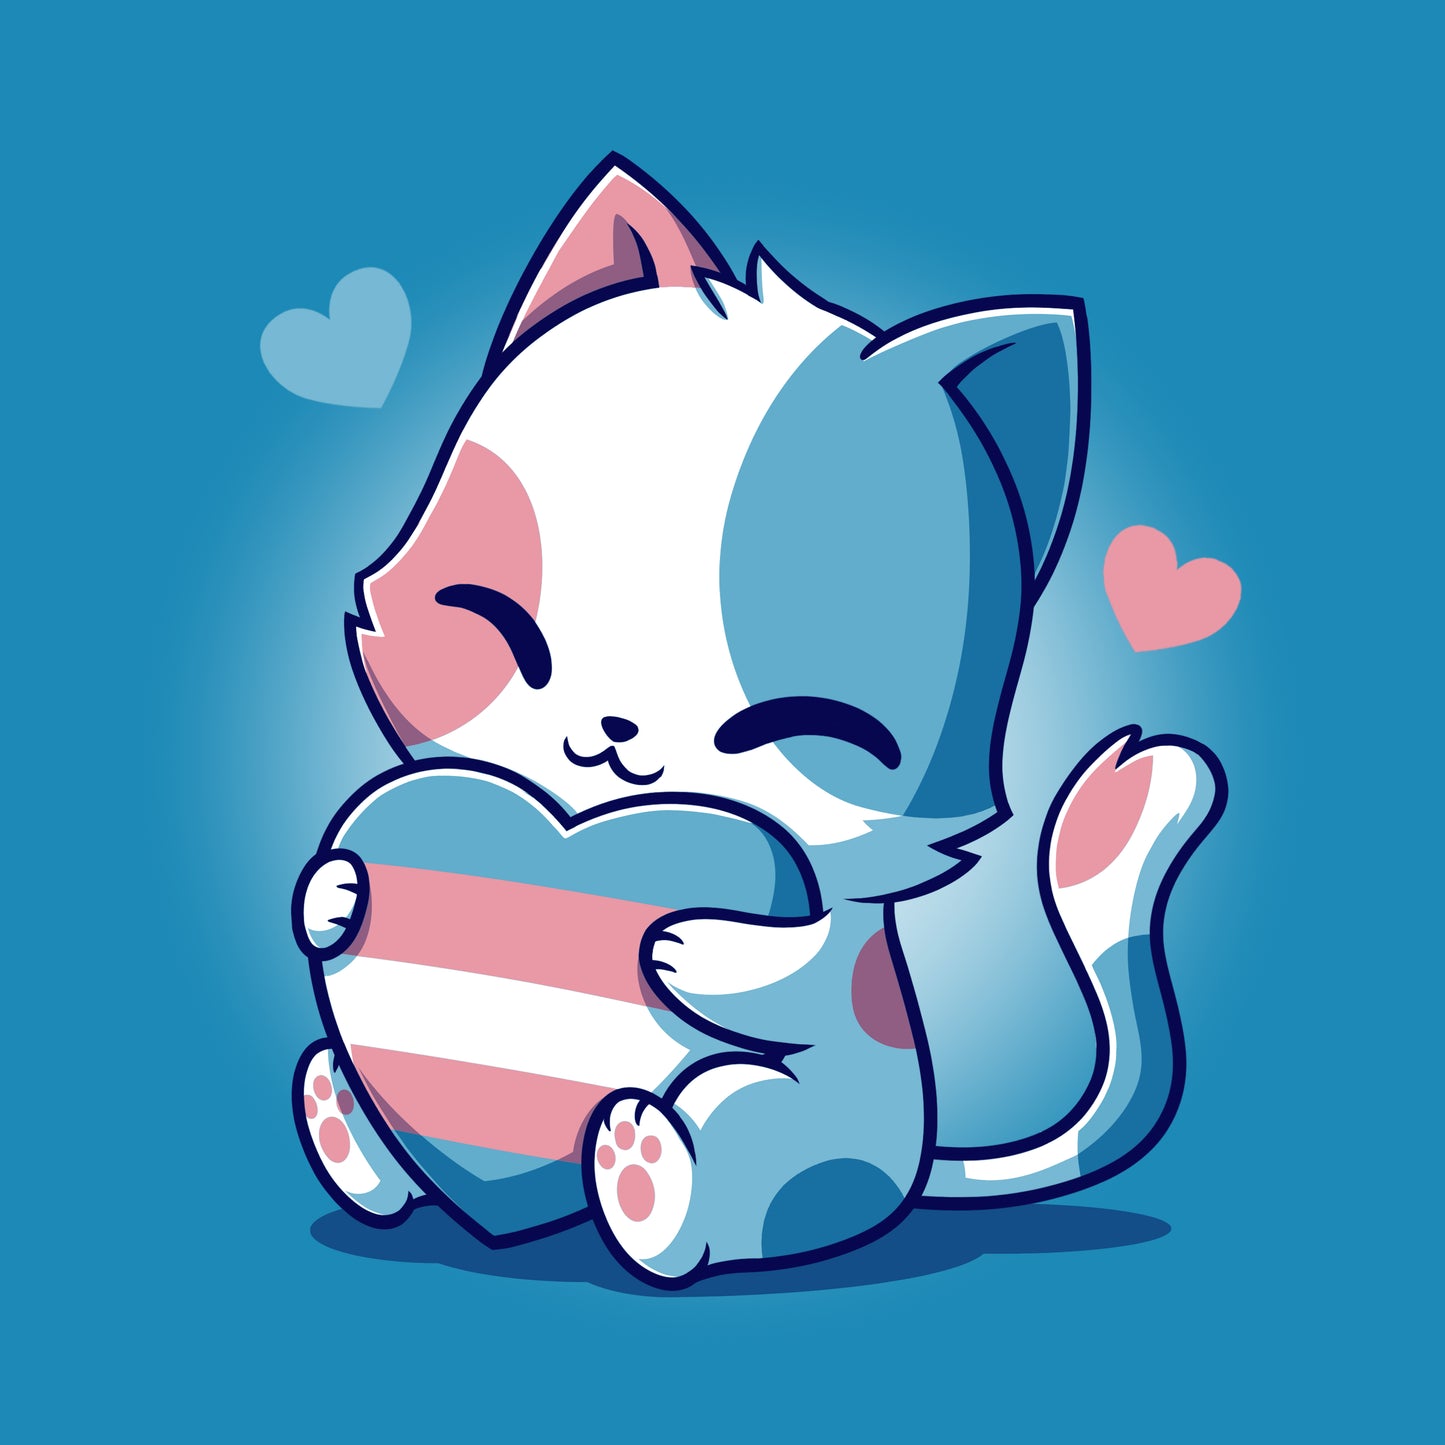 A cat wearing a TeeTurtle Trans Purride shirt holds a heart on a blue background.